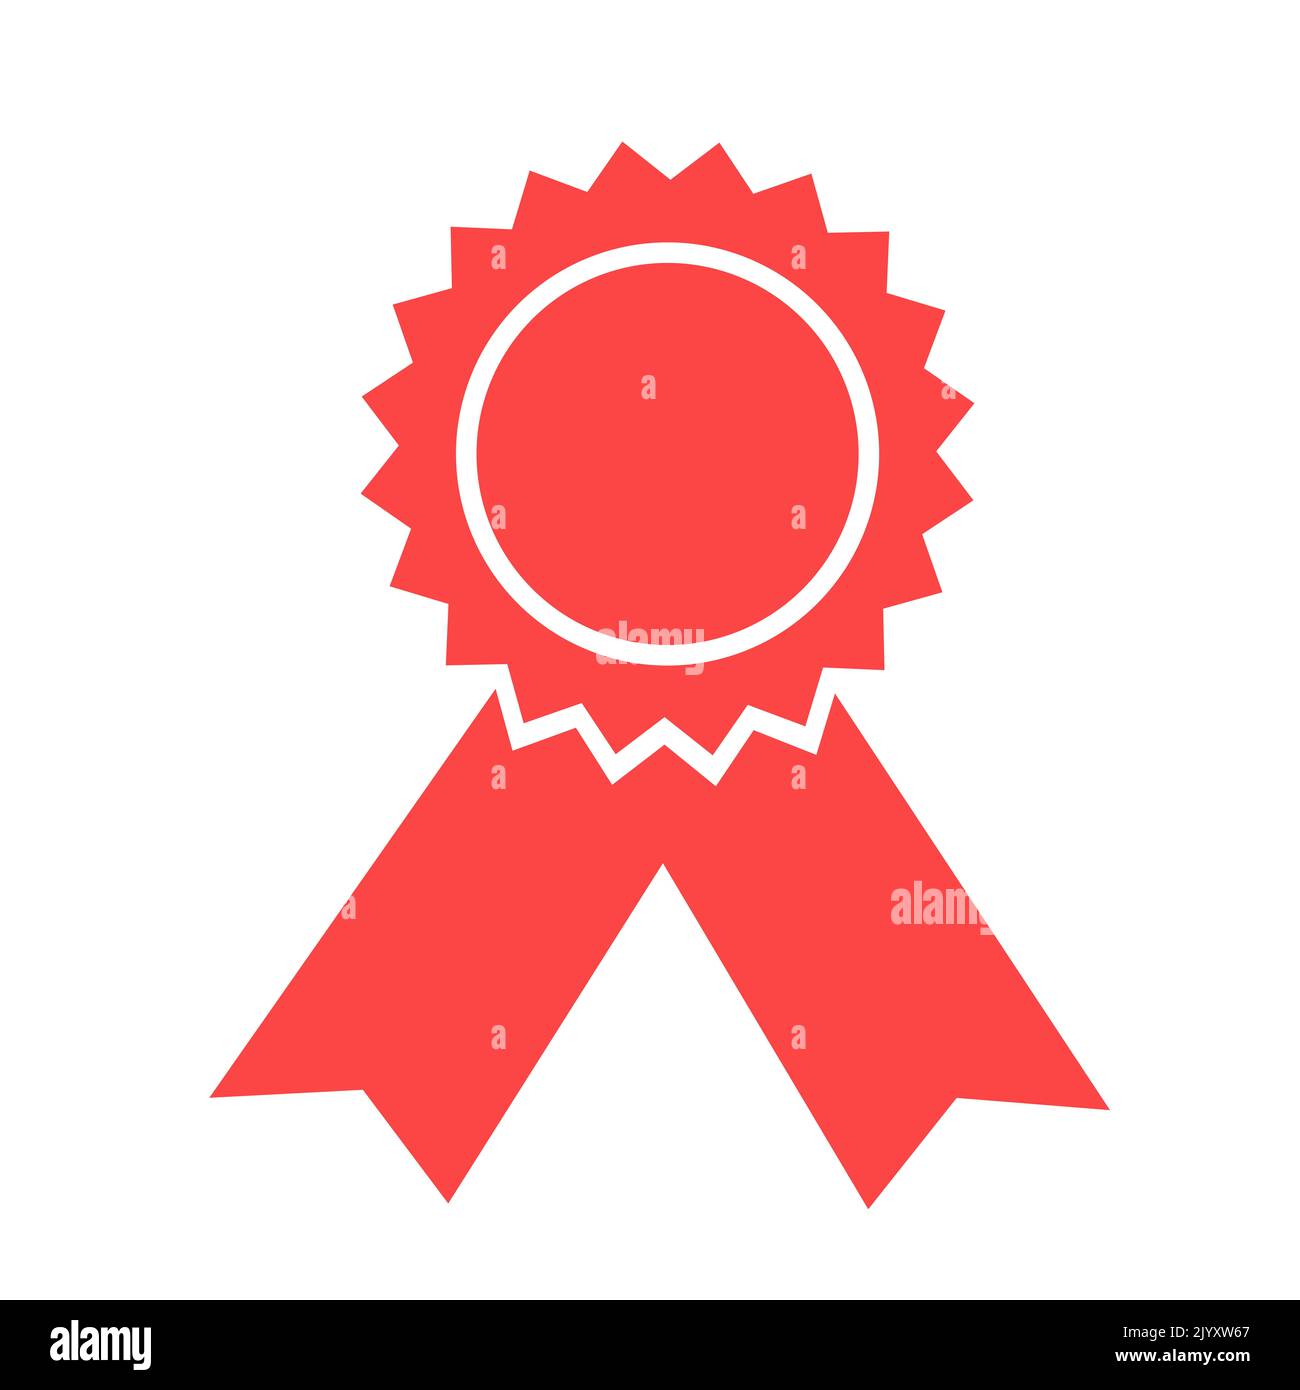 Certification stamp - metaphor of official license, permission, label, approval and confirmation. Vector illustration isolated on white. Stock Photo